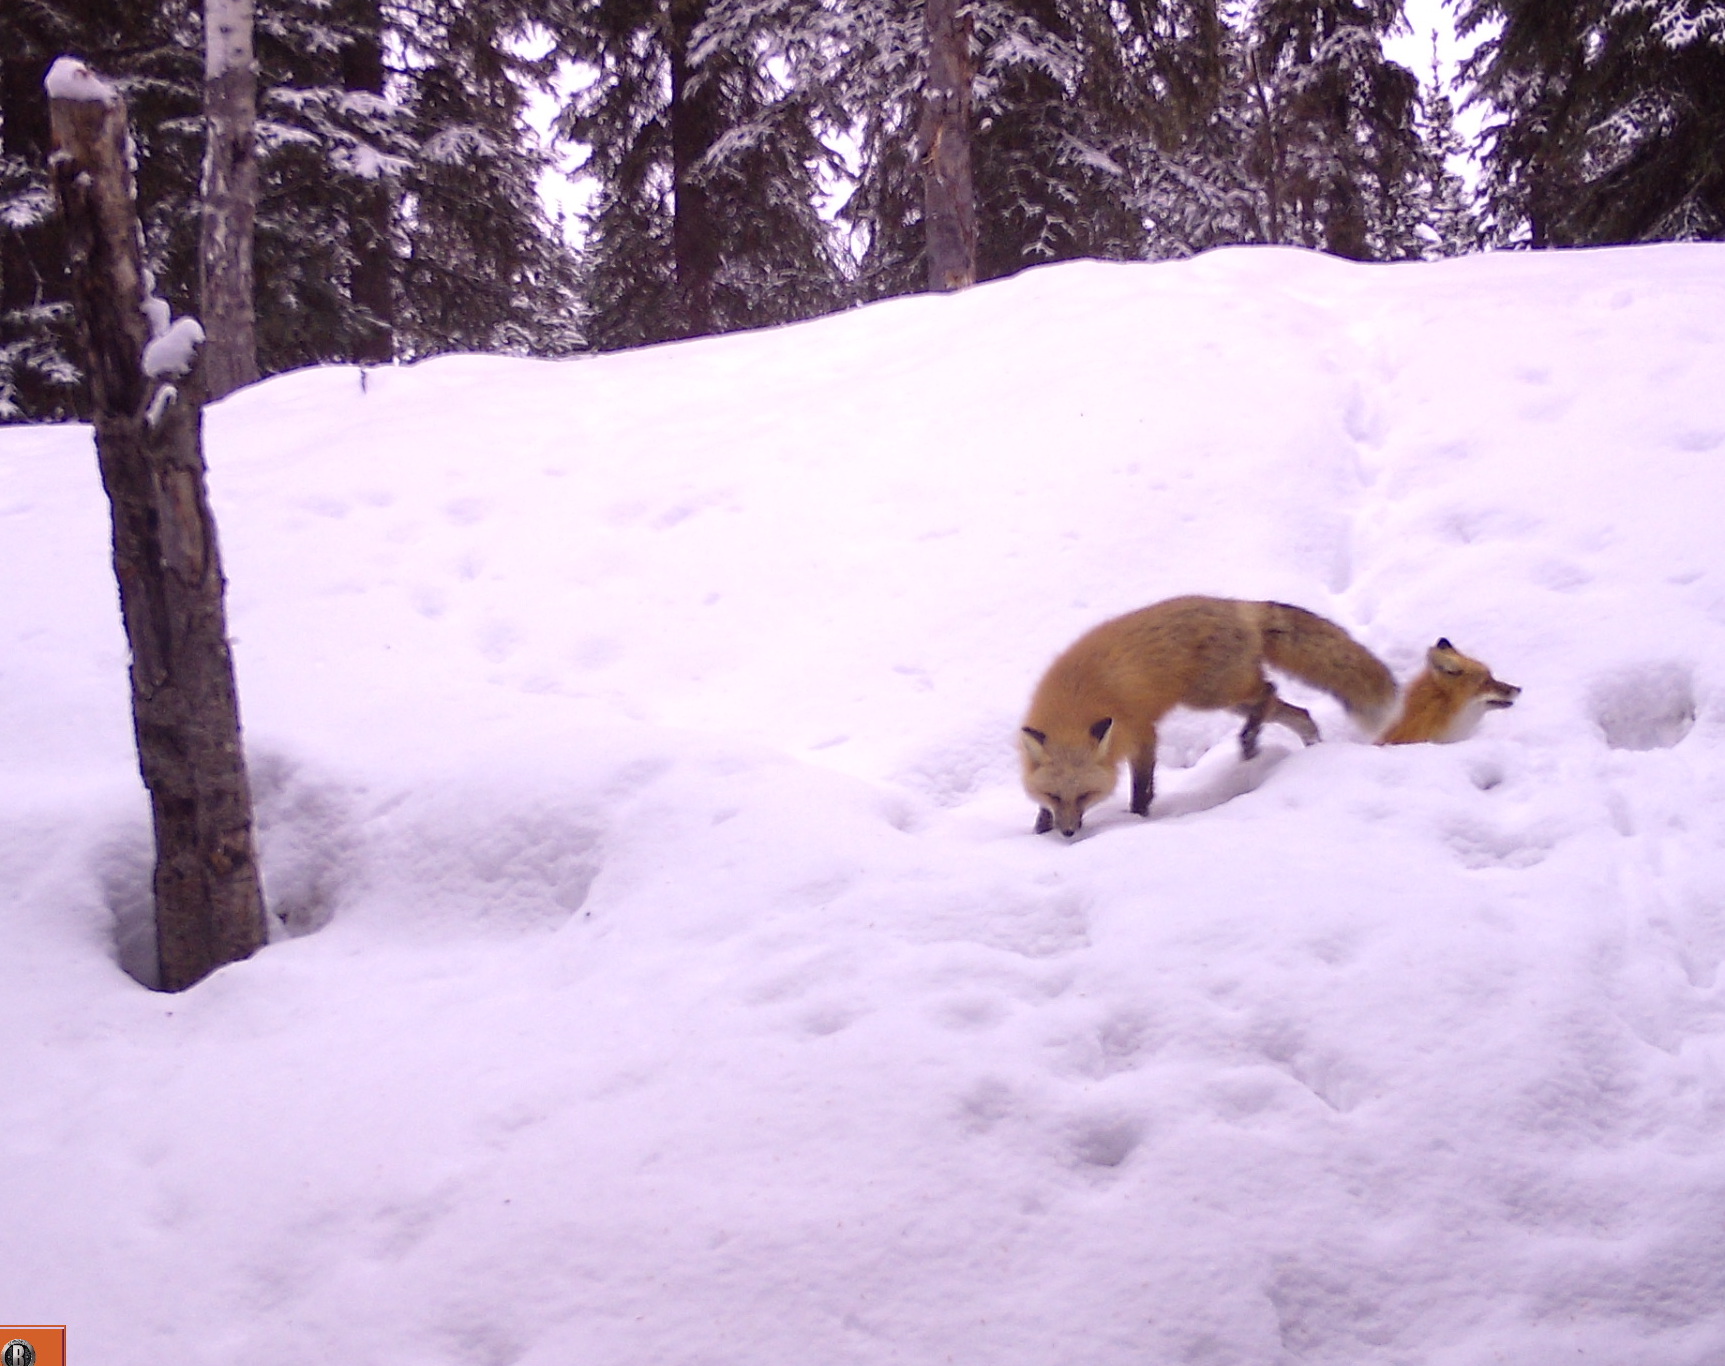 two red foxes in a snowy landscape, one sitting in a hole with only its head visible